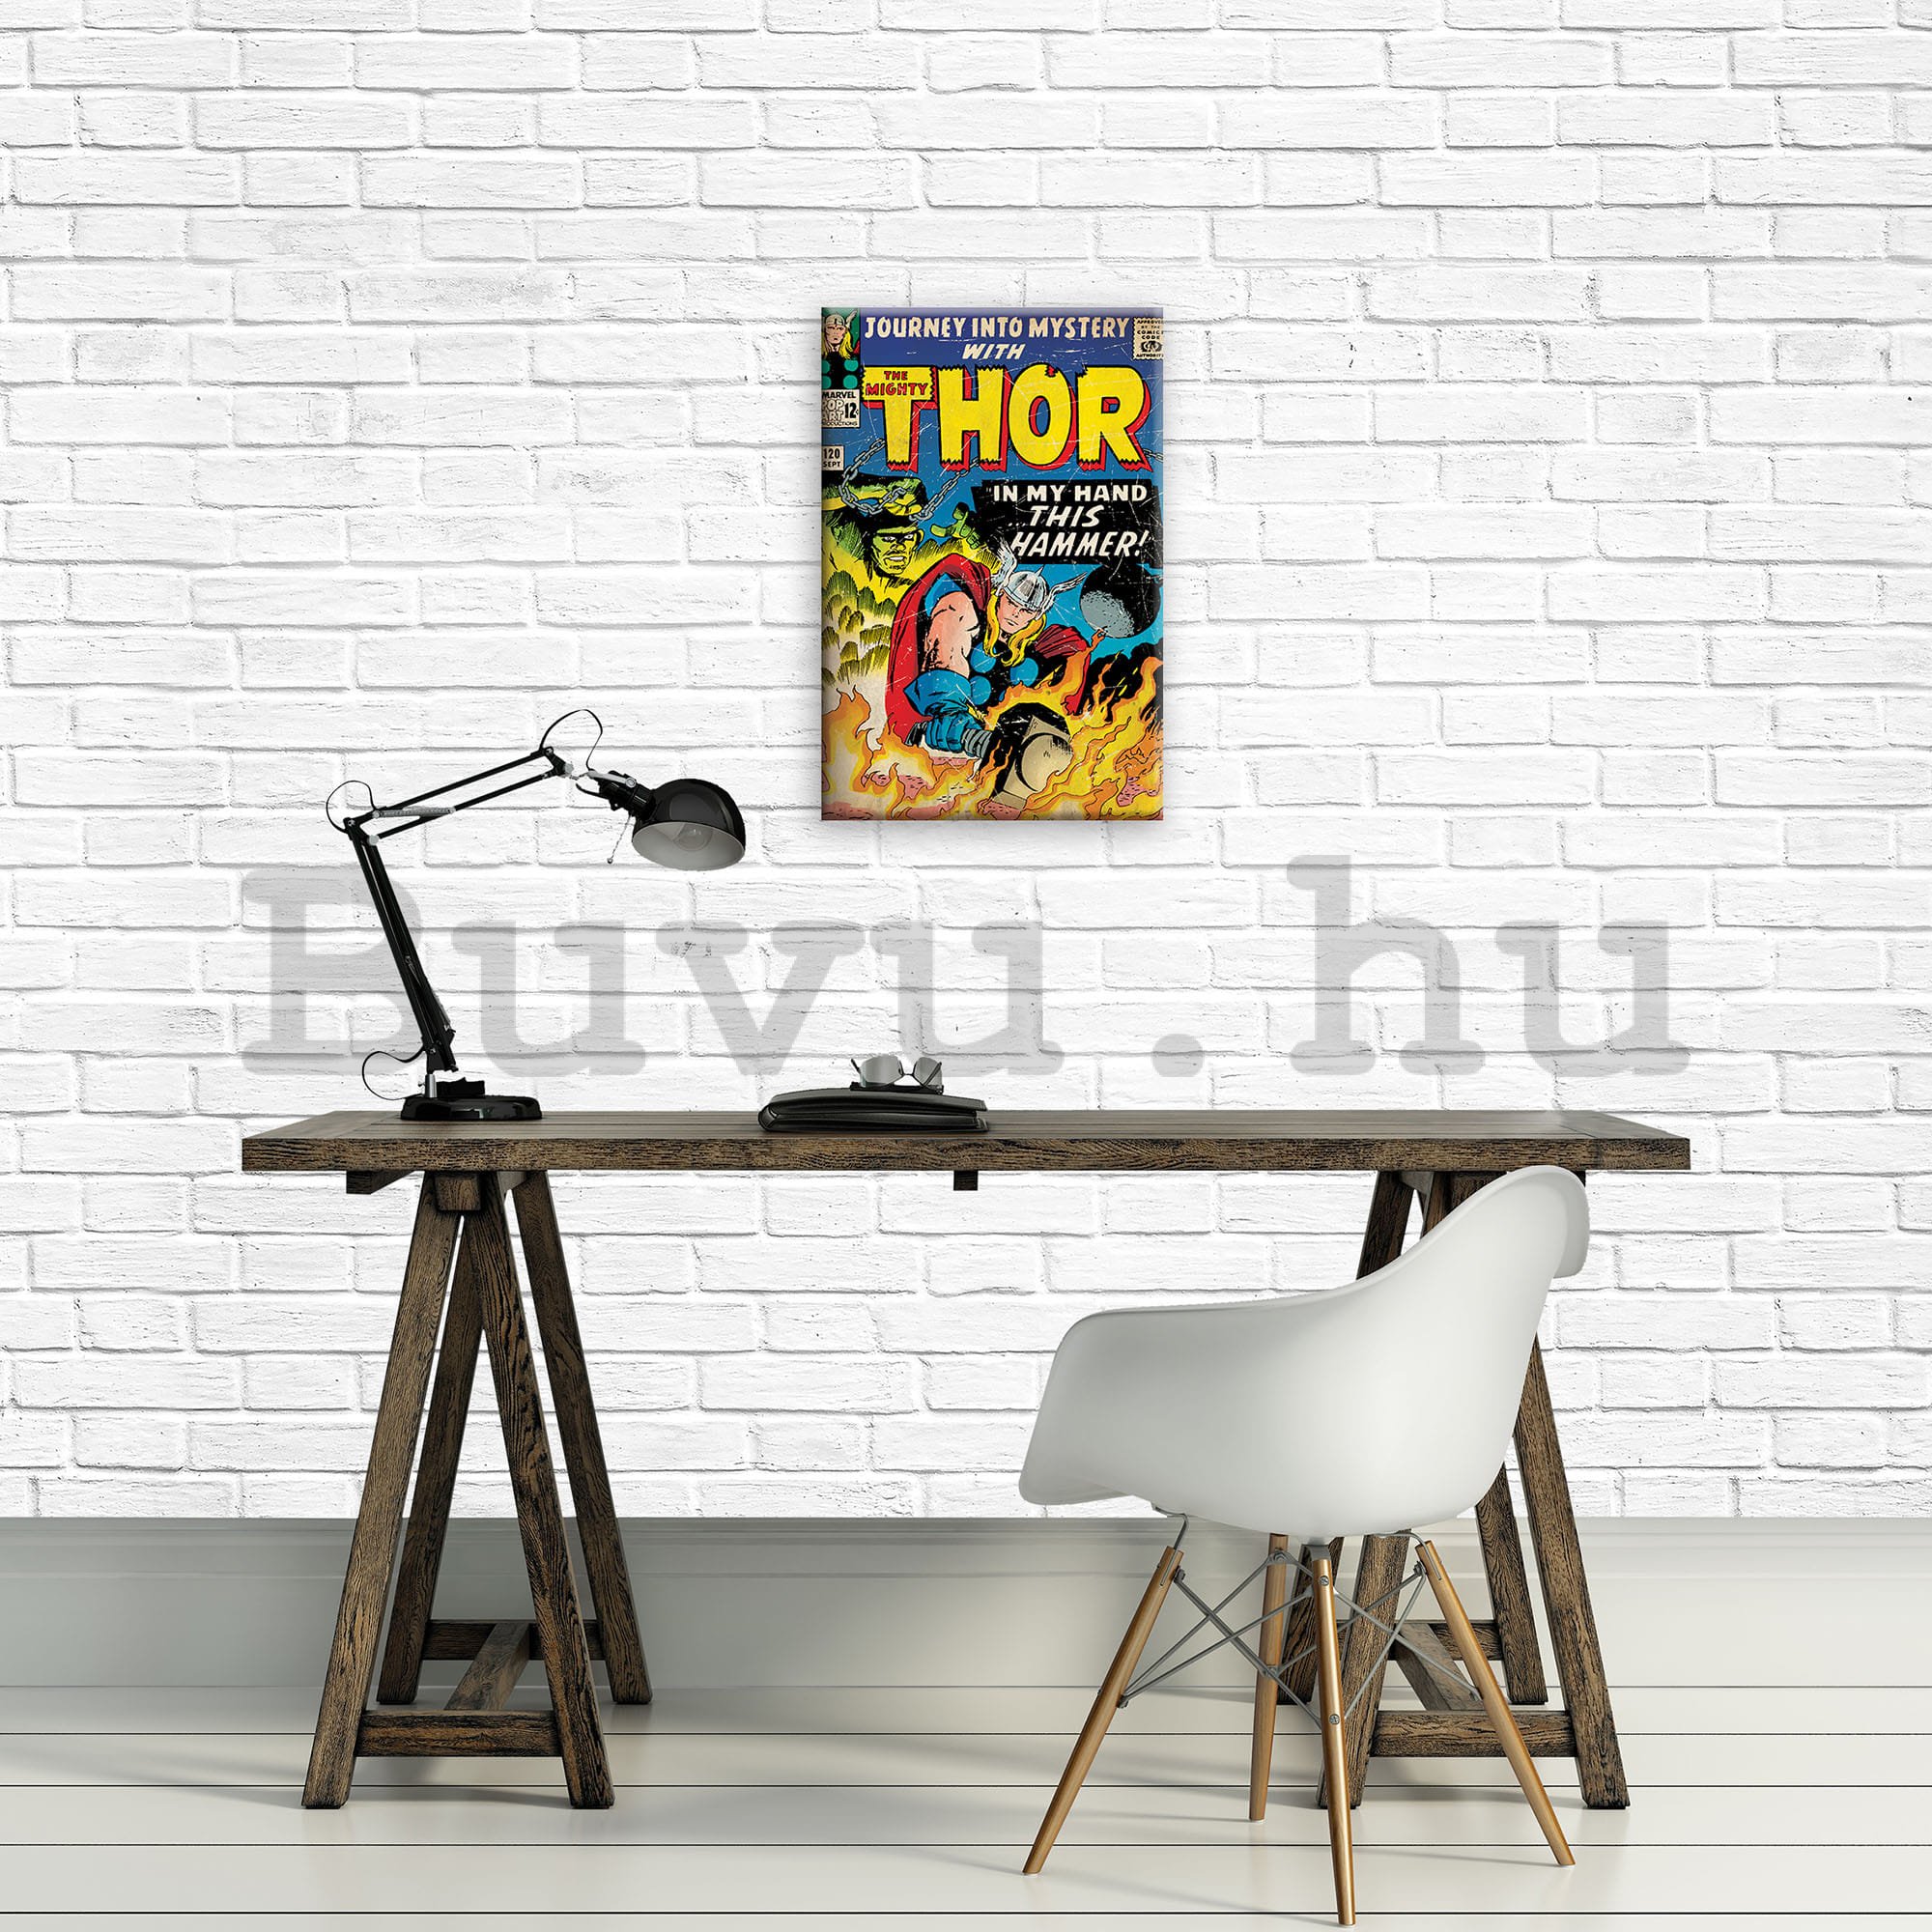 Vászonkép: The Mighty Thor (In My Hand This Hammer!) - 40x60 cm